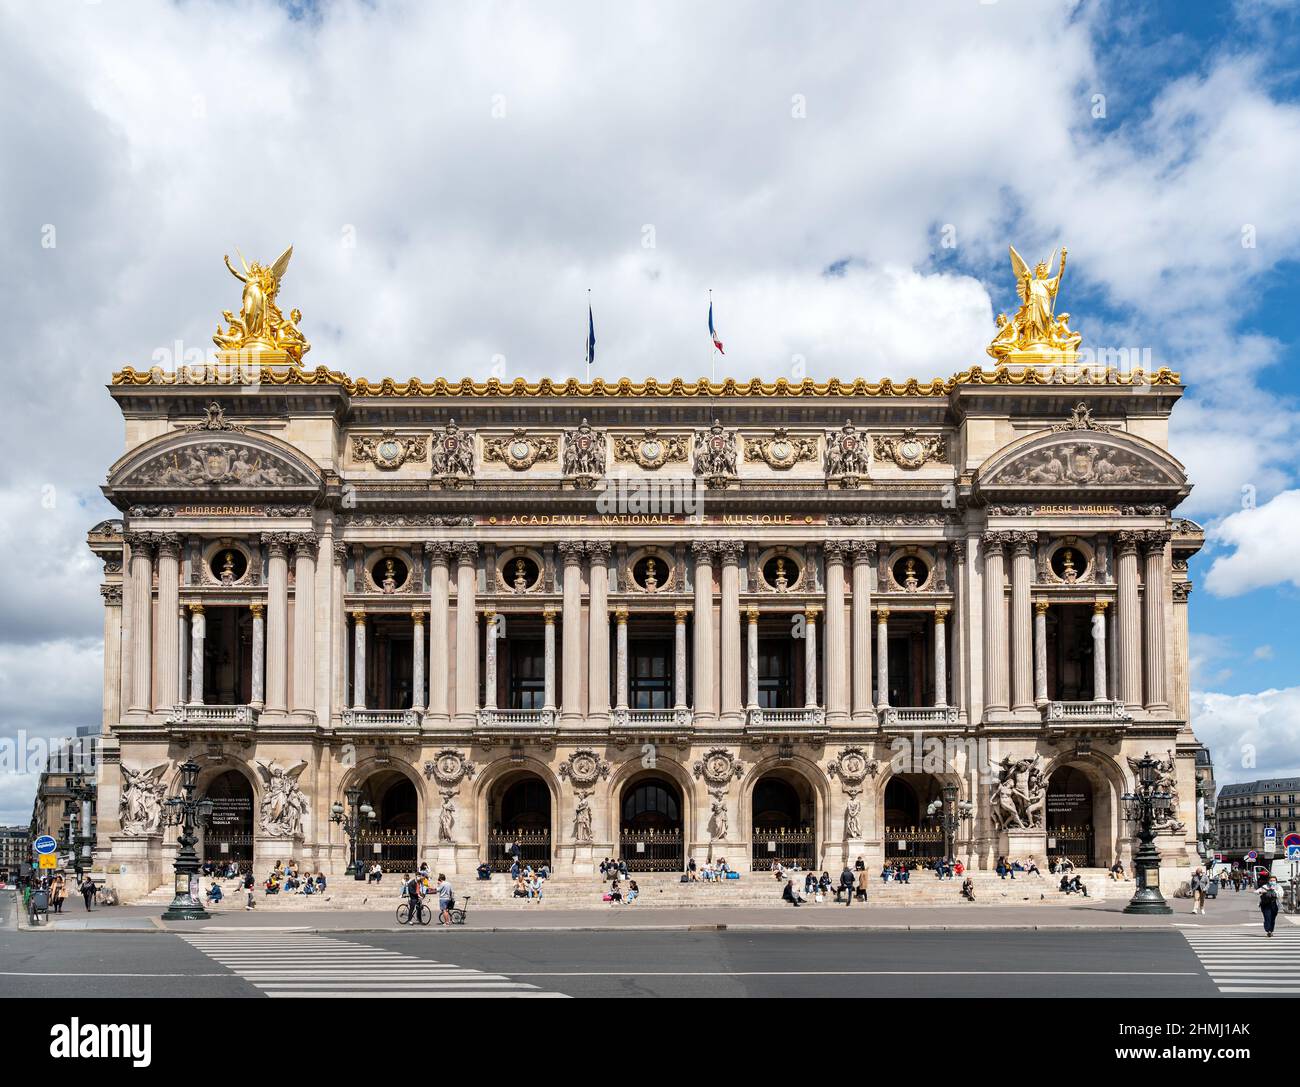 Parisians relaxing on the steps of the Opera Garnier house - Paris, France Stock Photo